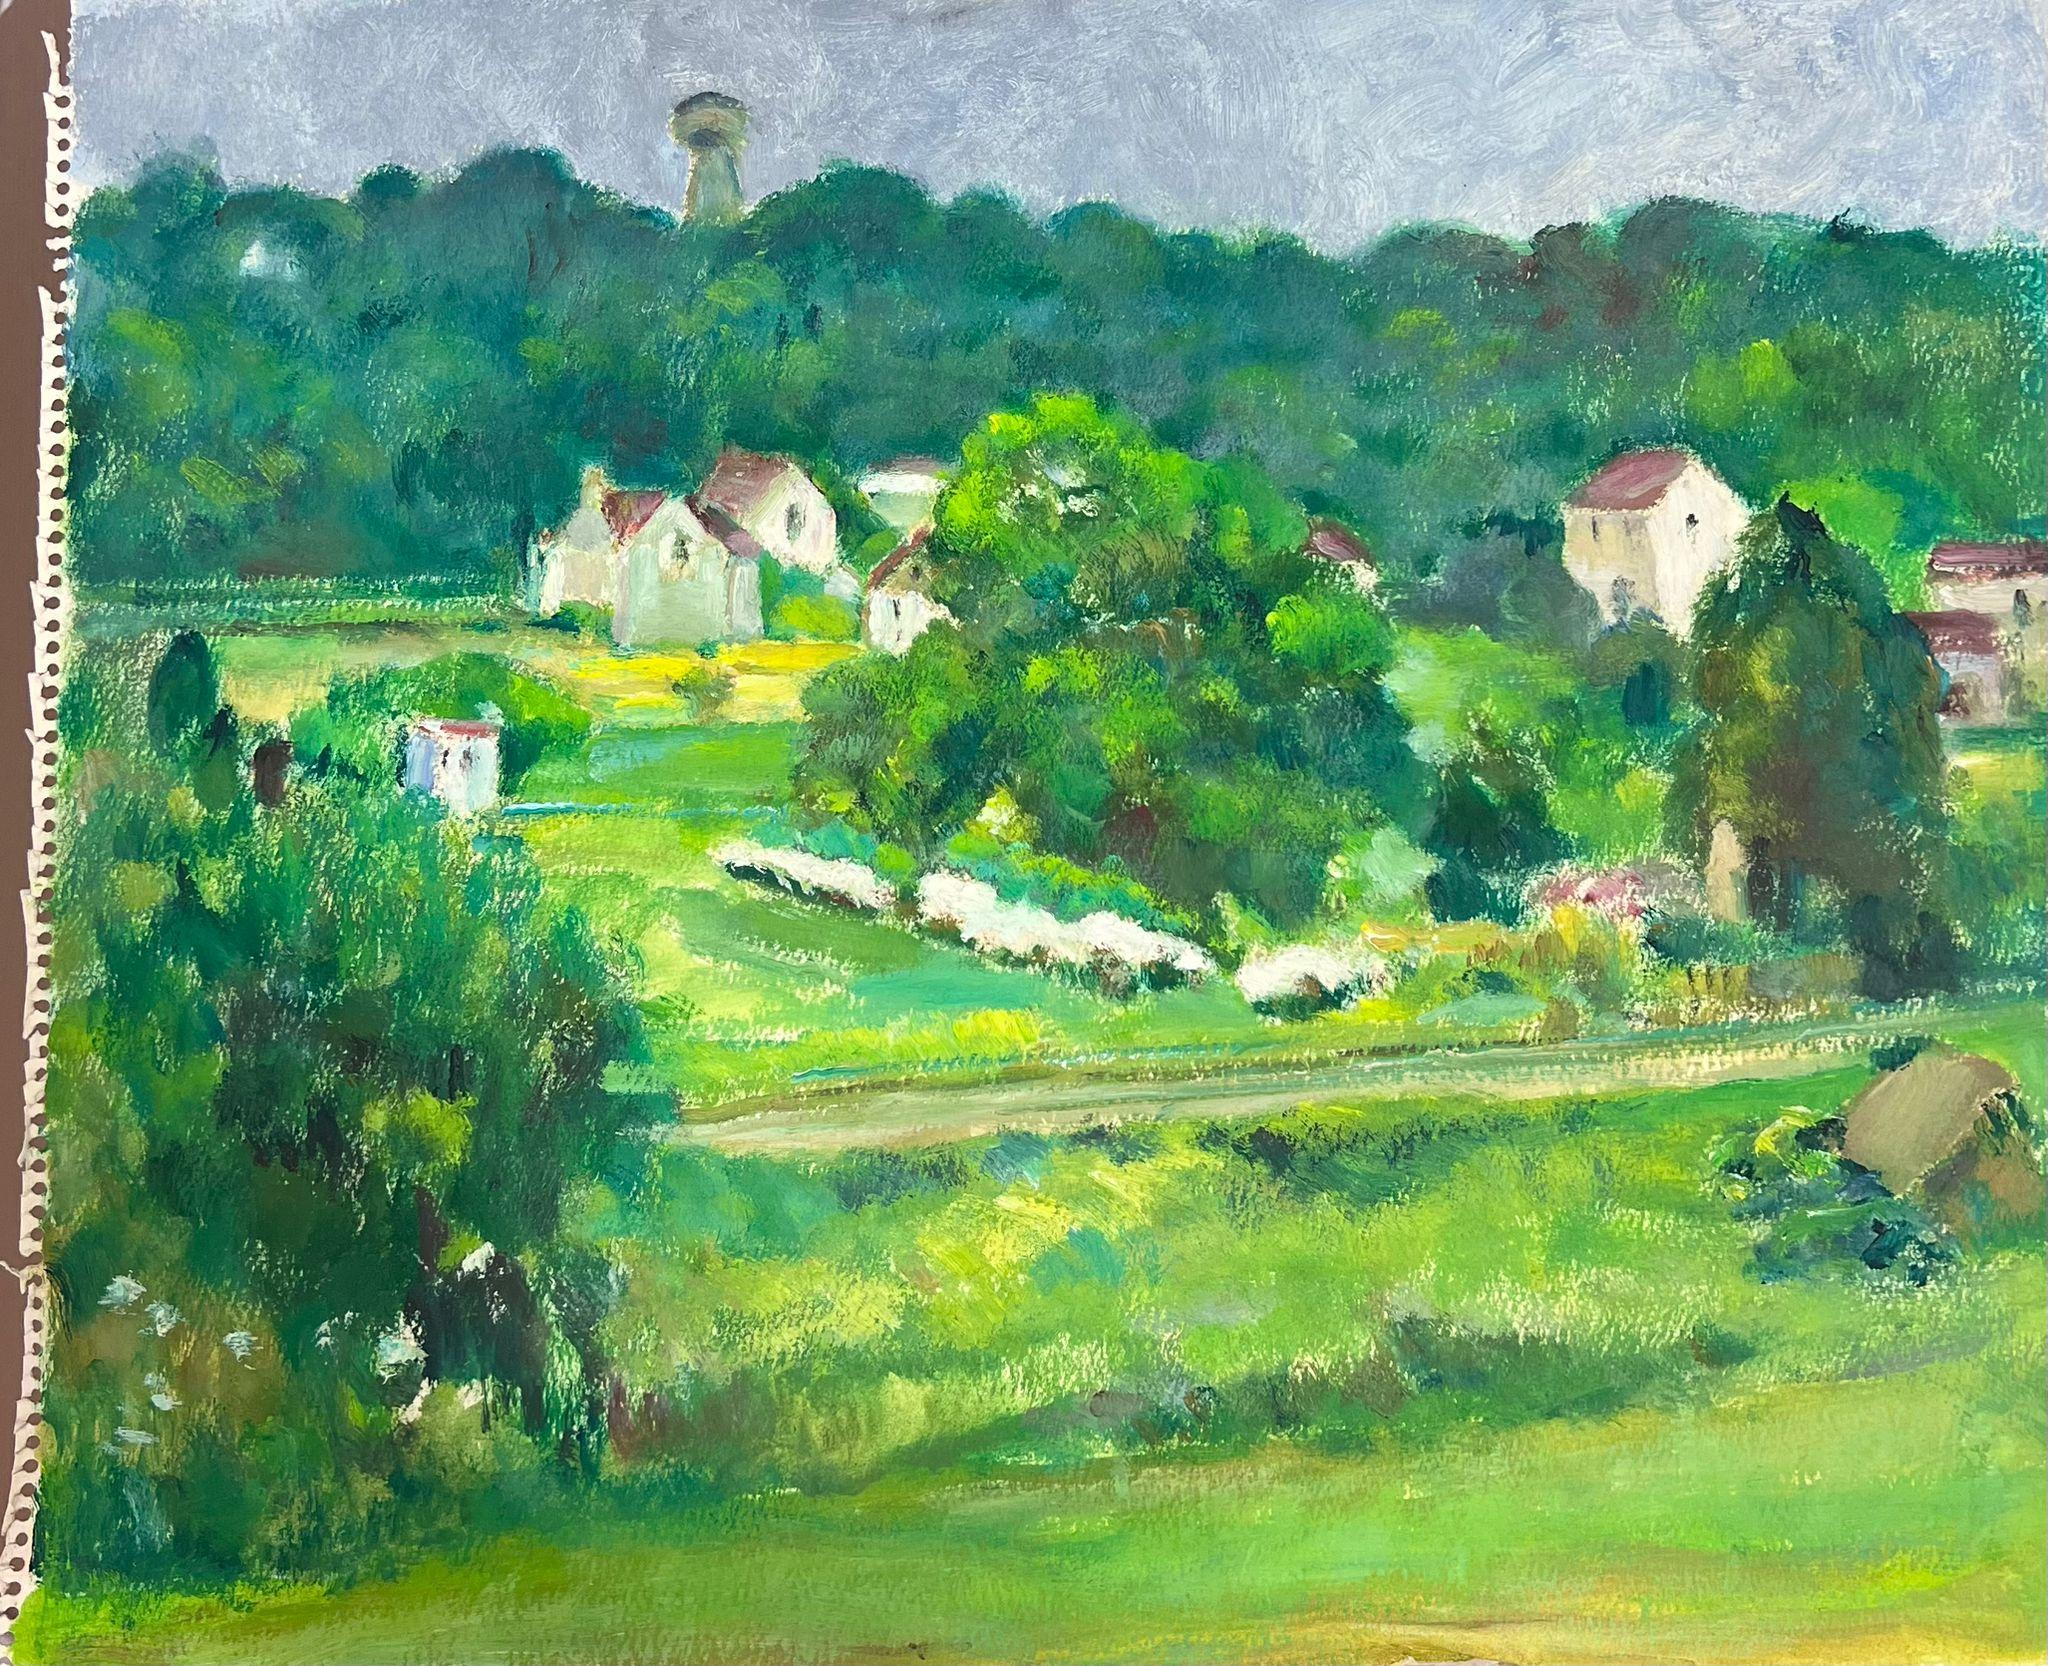 Bright Green Summer Field Landscape
by Louise Alix, French 1950's Impressionist 
gouache on artist paper, unframed
painting: 15 x 18 inches
provenance: from a large private collection of this artists work in Northern France
condition: original, good